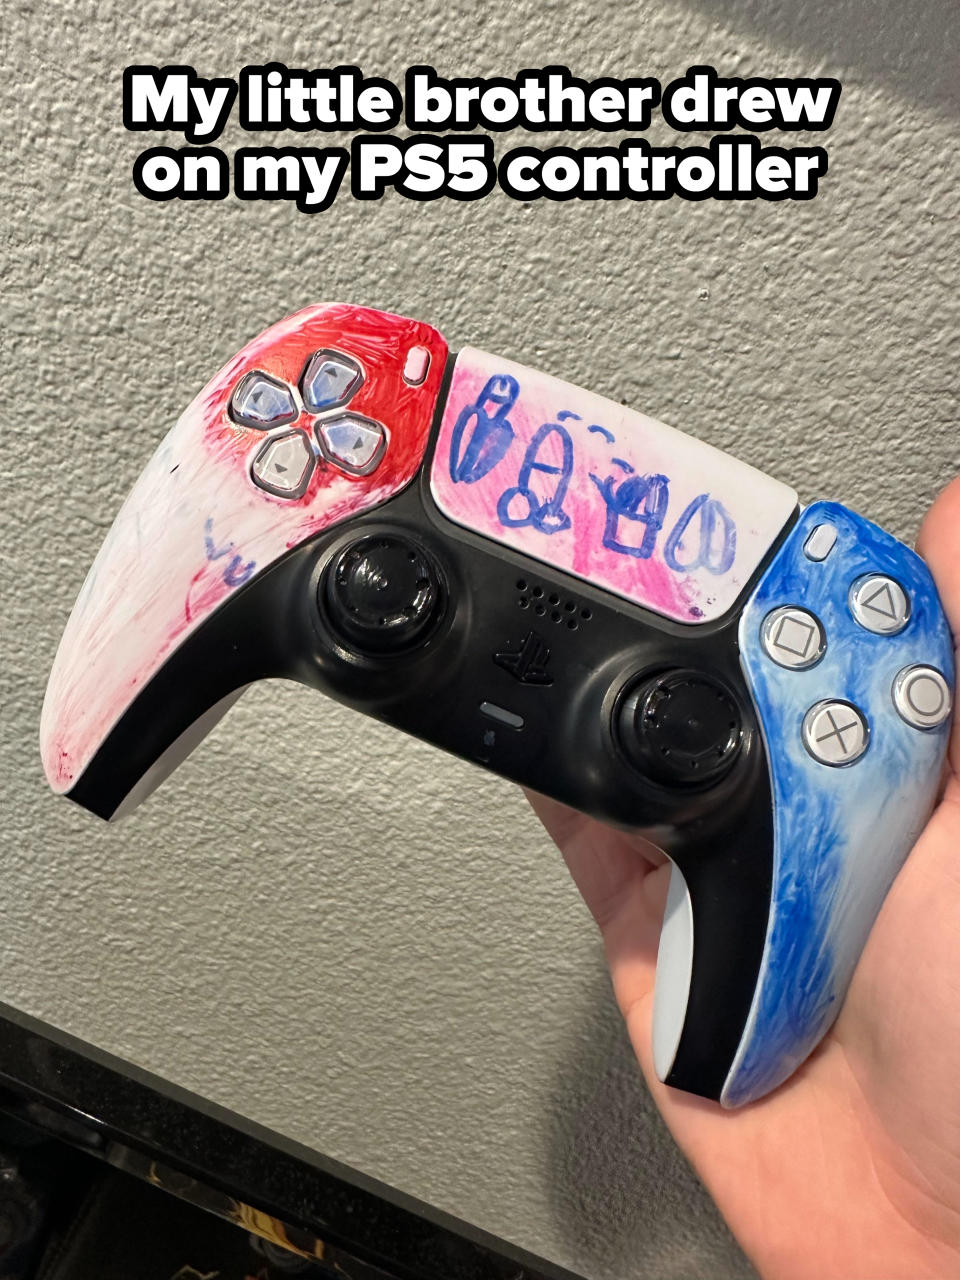 "My little brother drew on my PS5 controller"